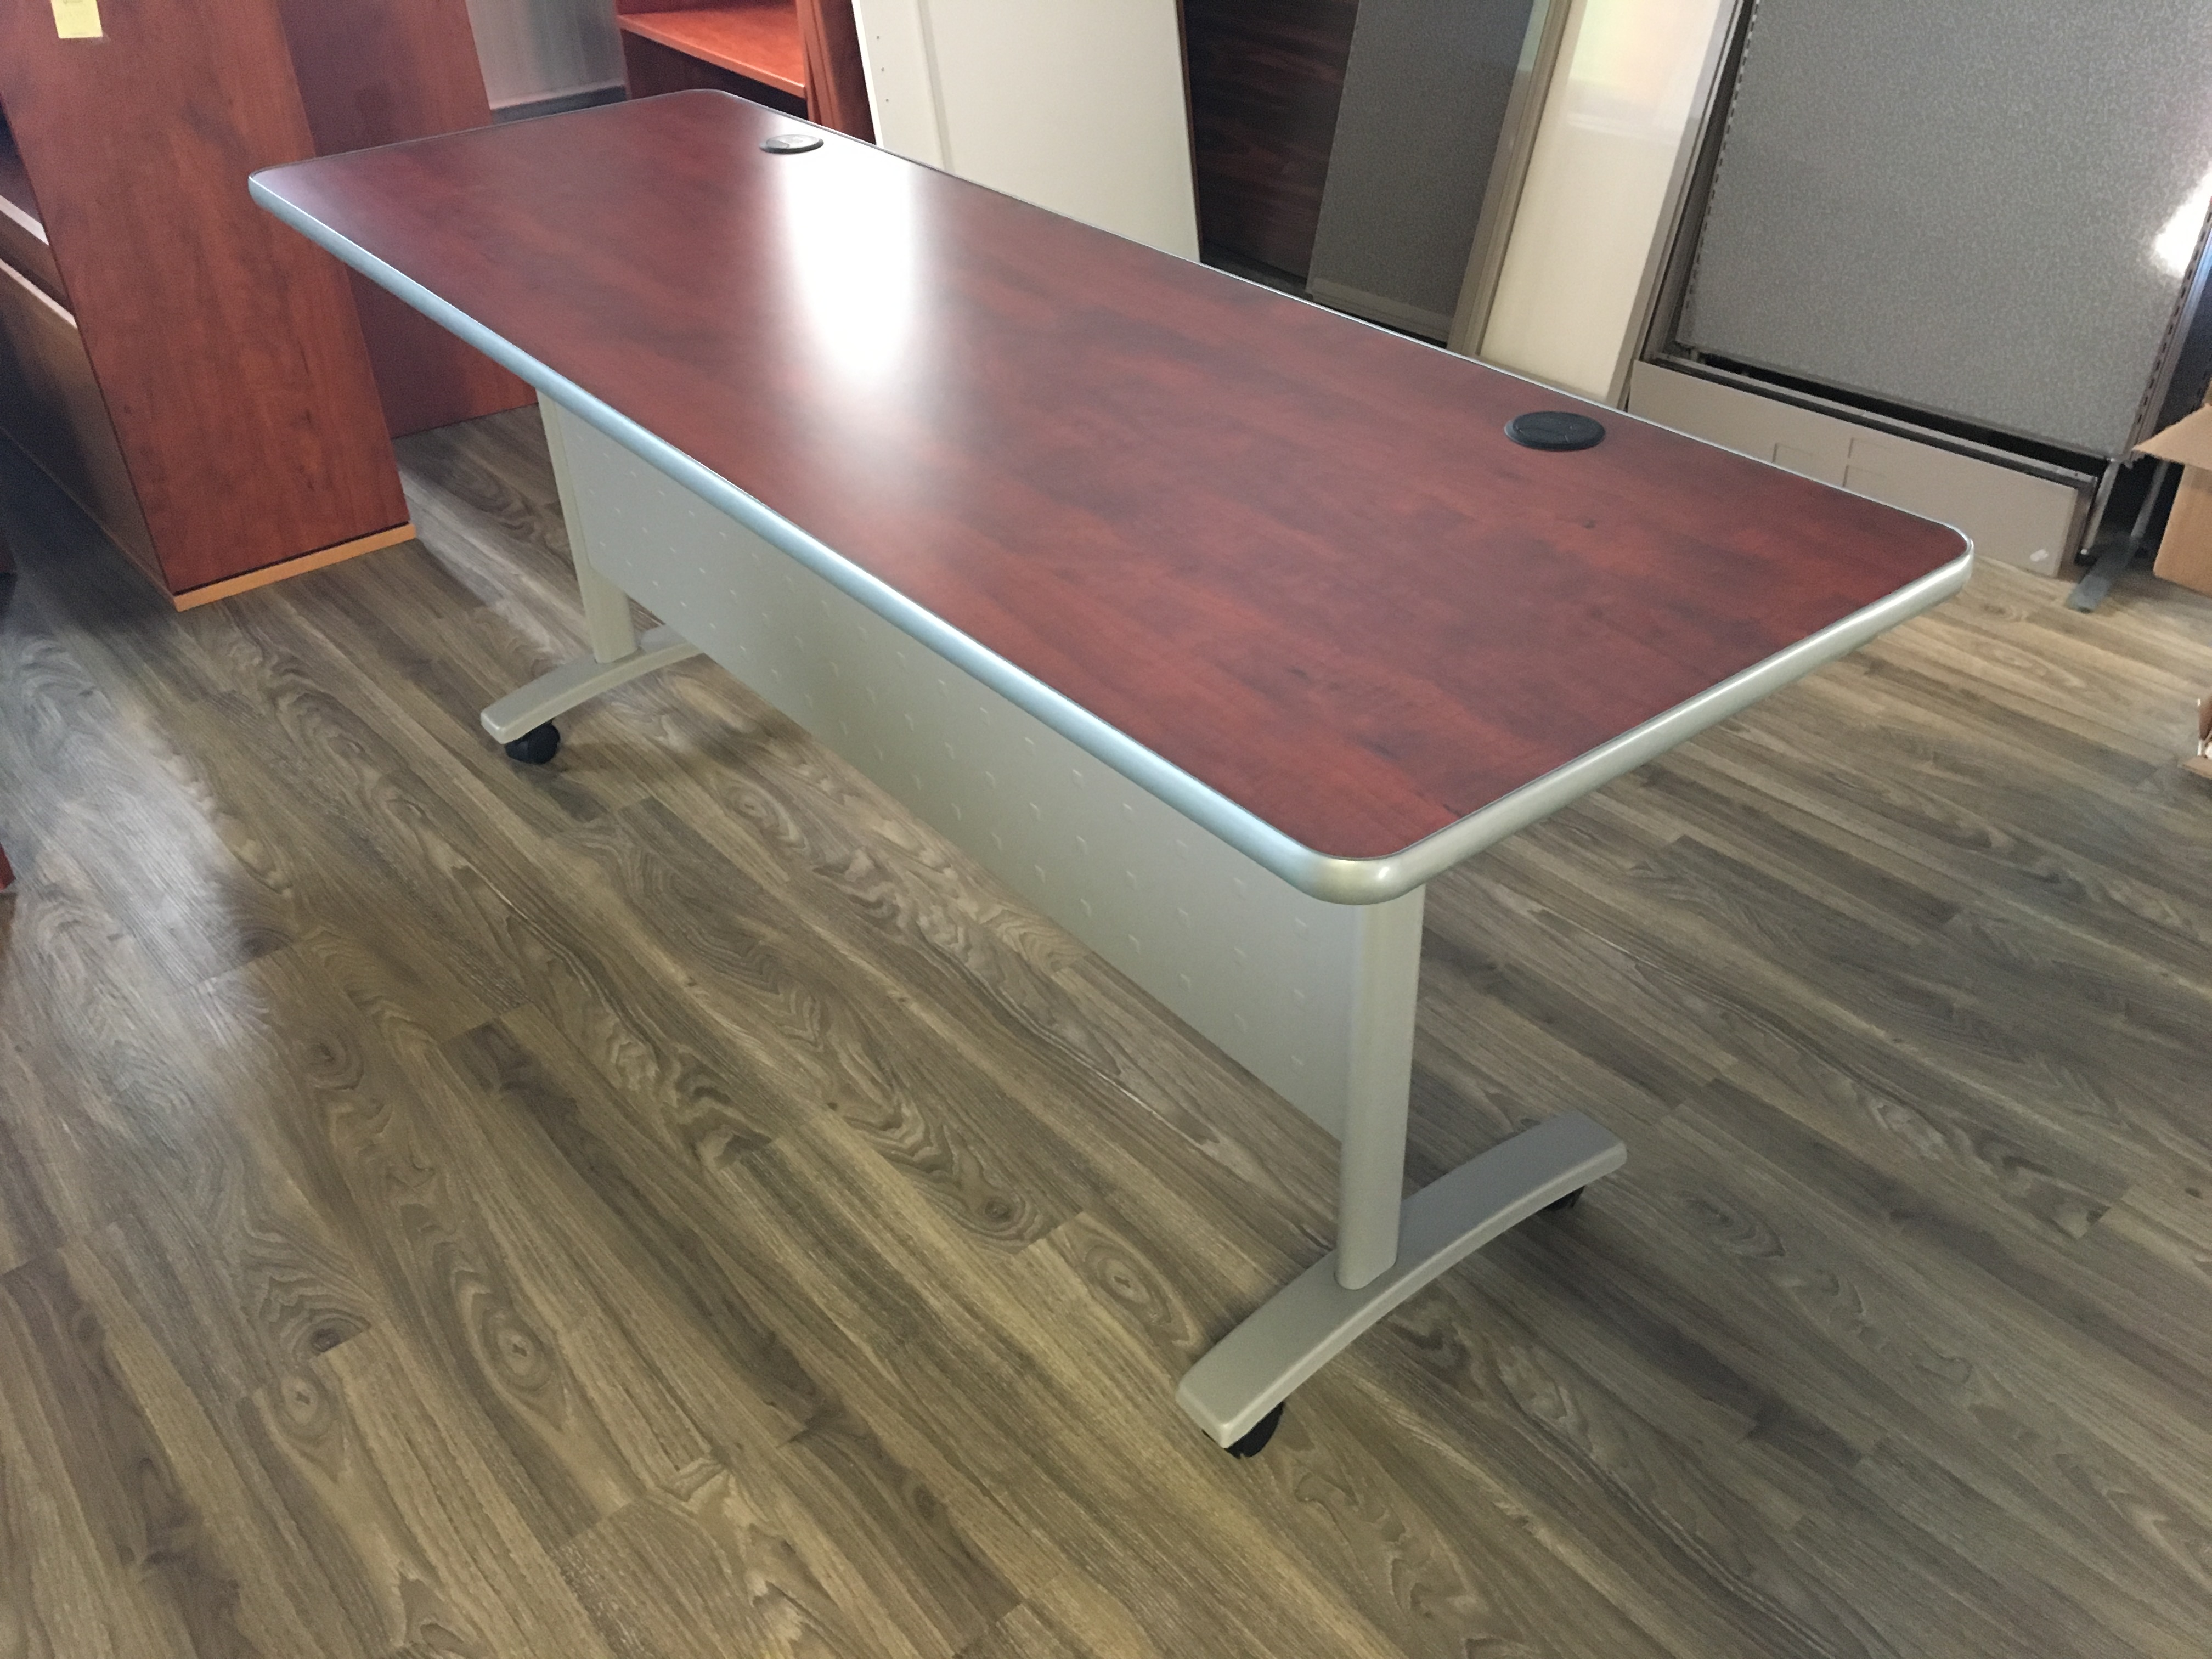 Tucana Conference Table